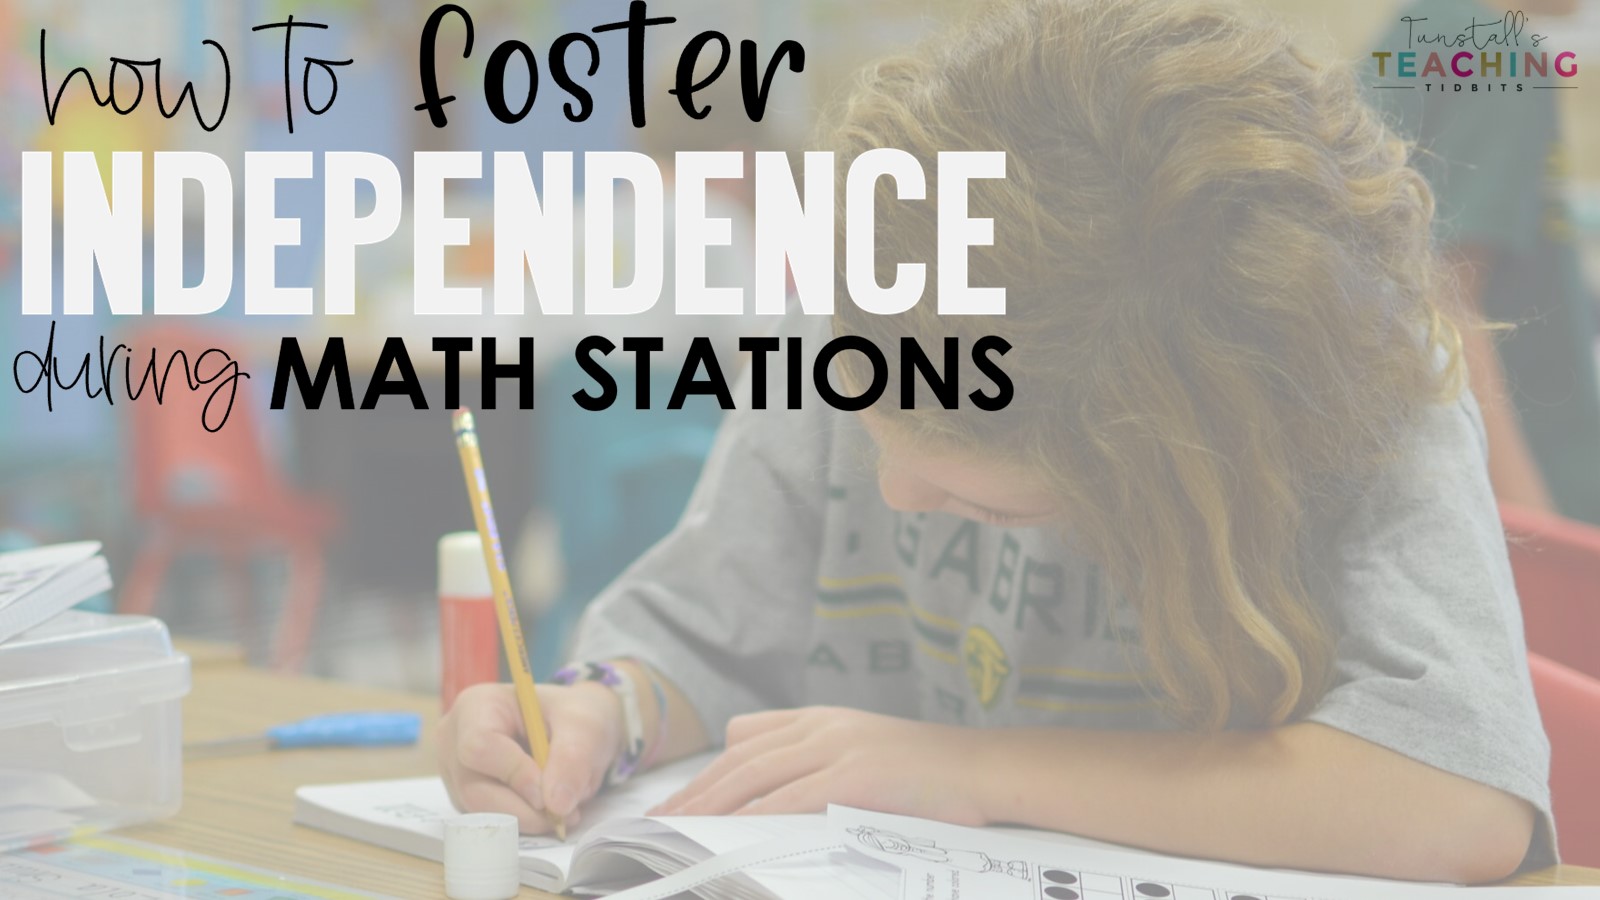 How to Foster Independence During Math Stations